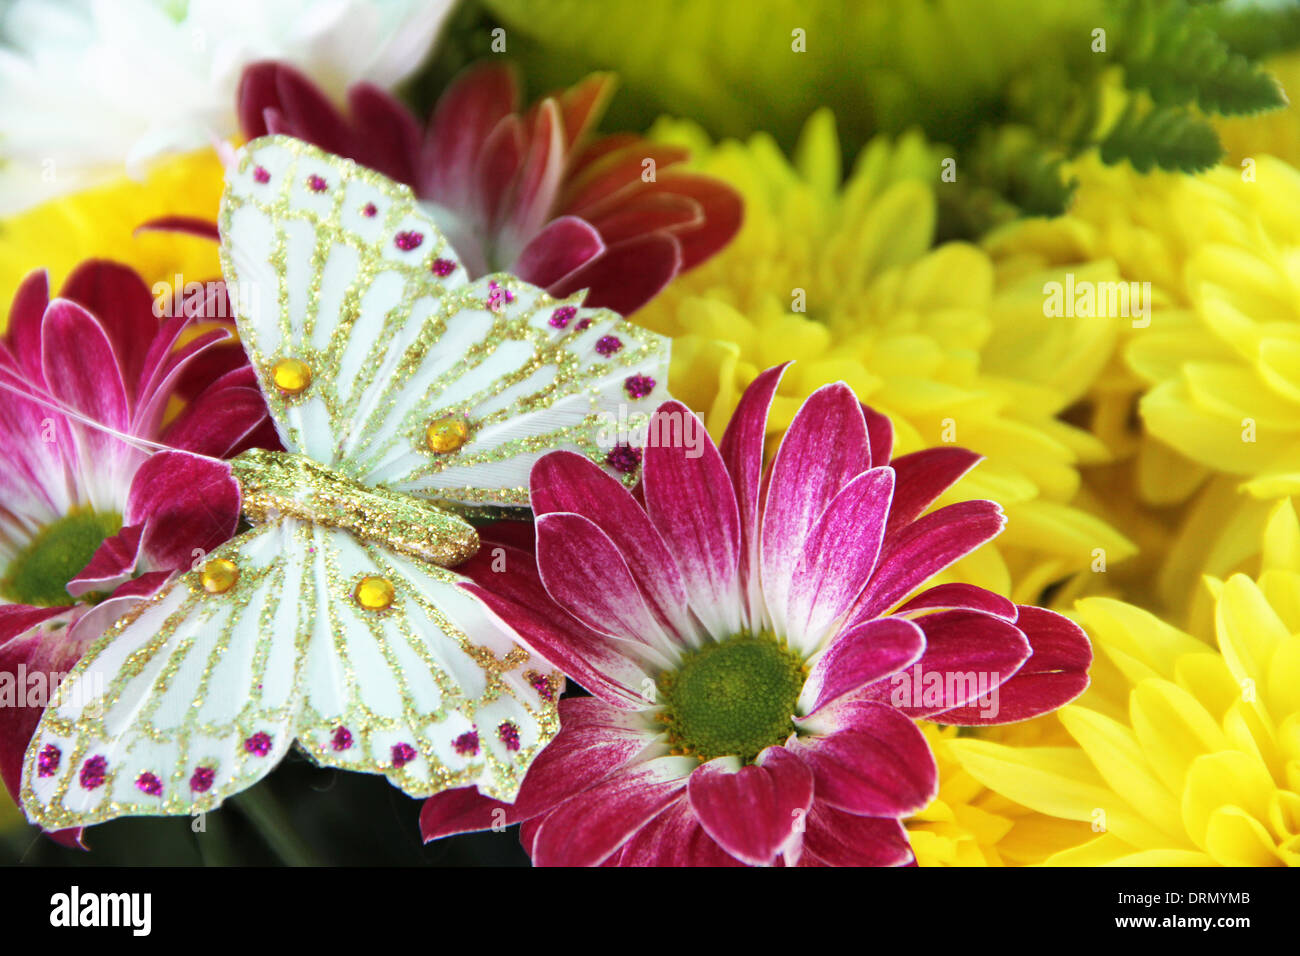 Bunch of different flowers close up background Stock Photo